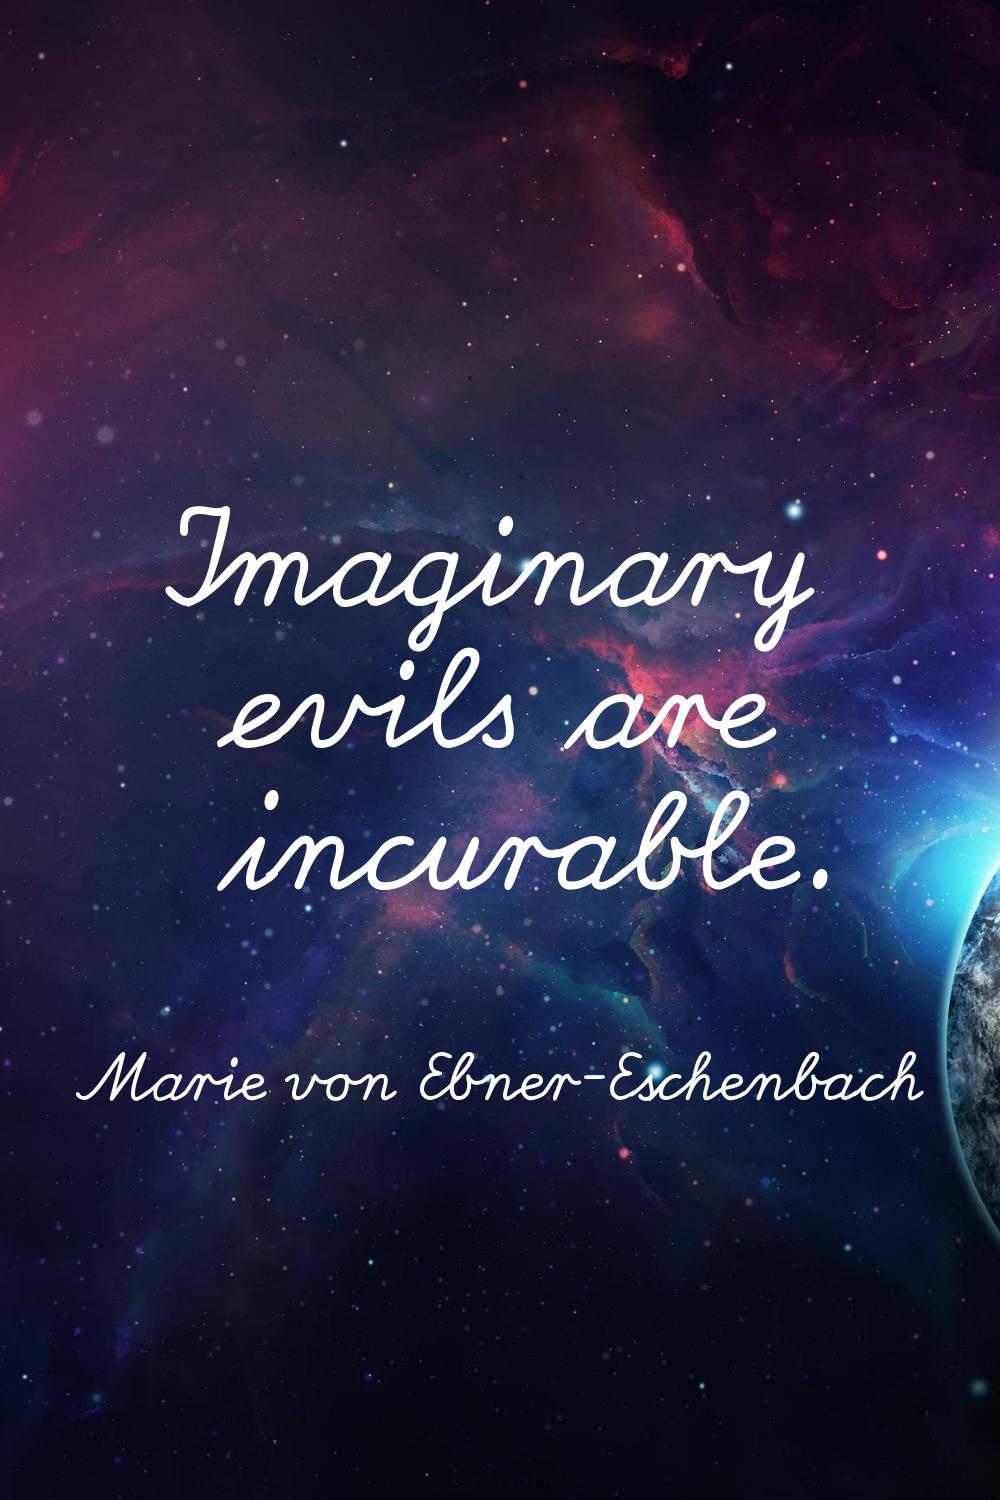 Imaginary evils are incurable.